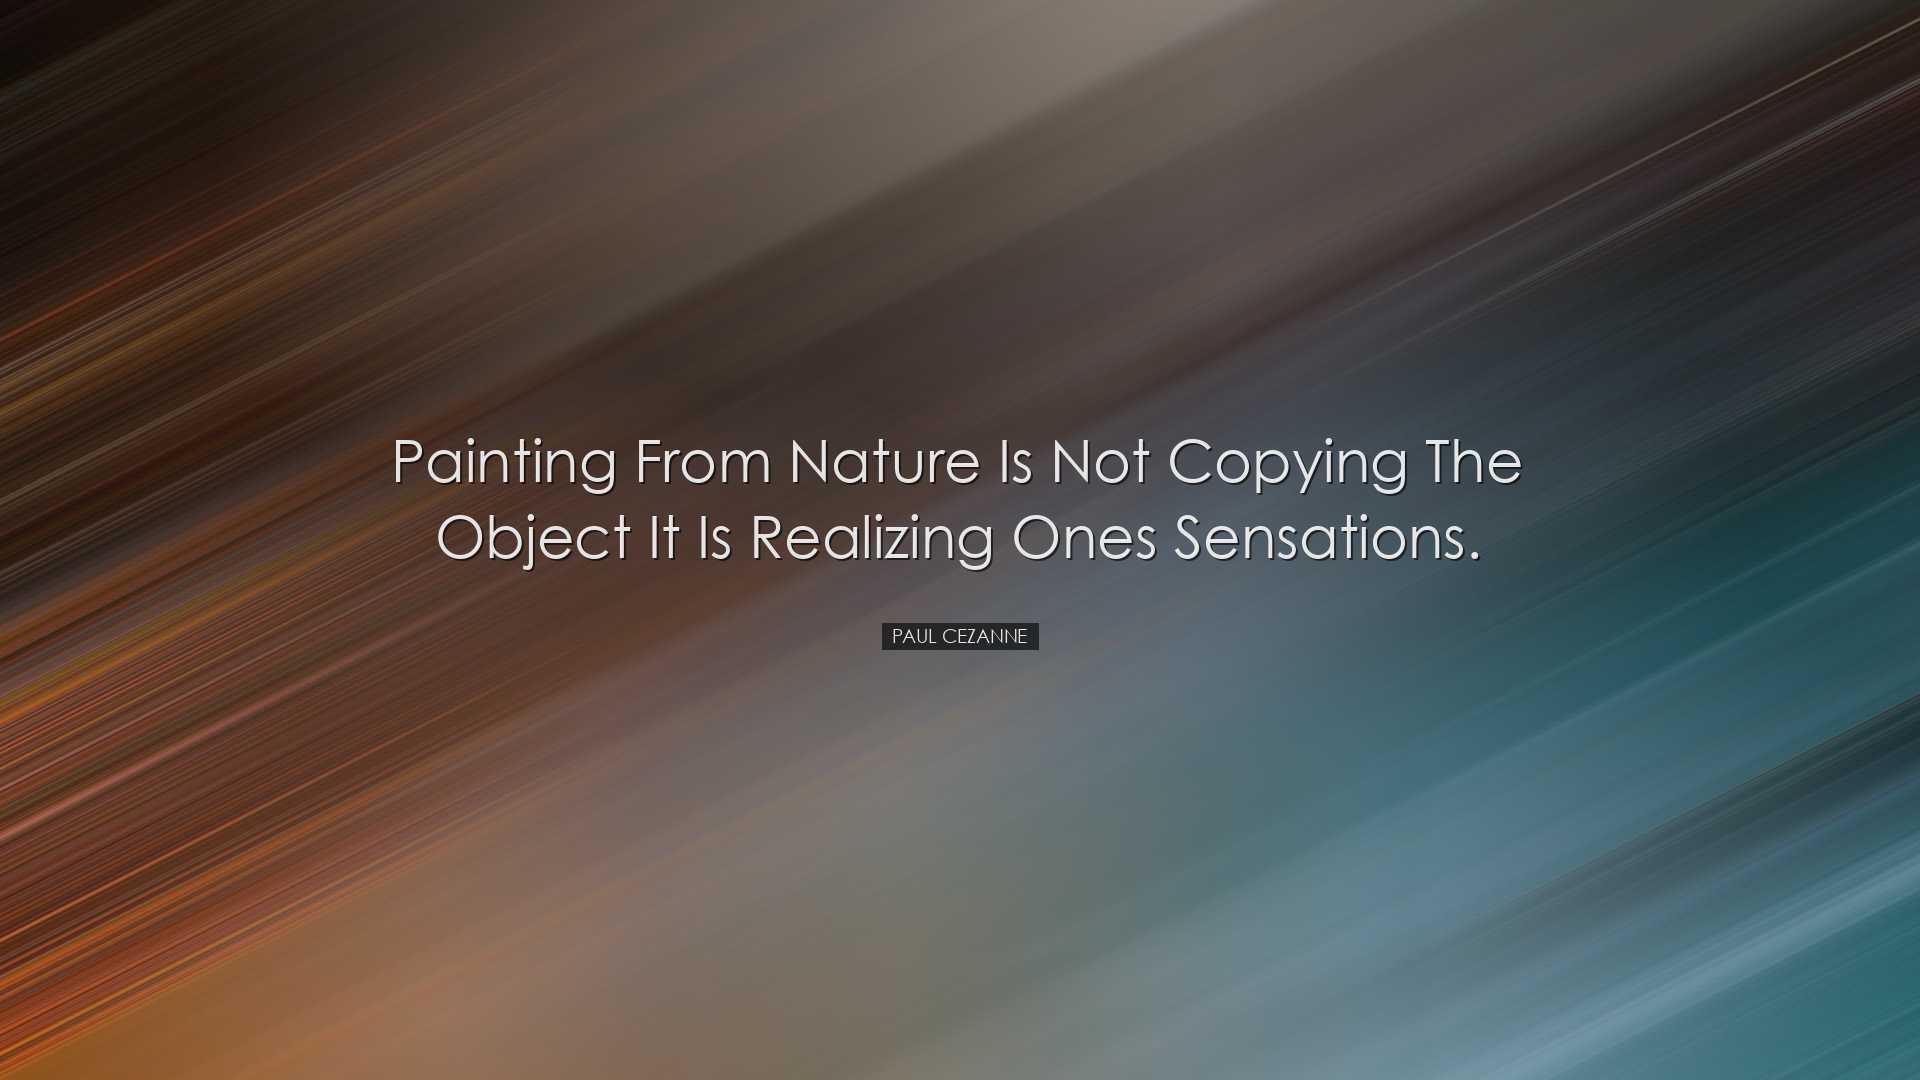 Painting from nature is not copying the object it is realizing one